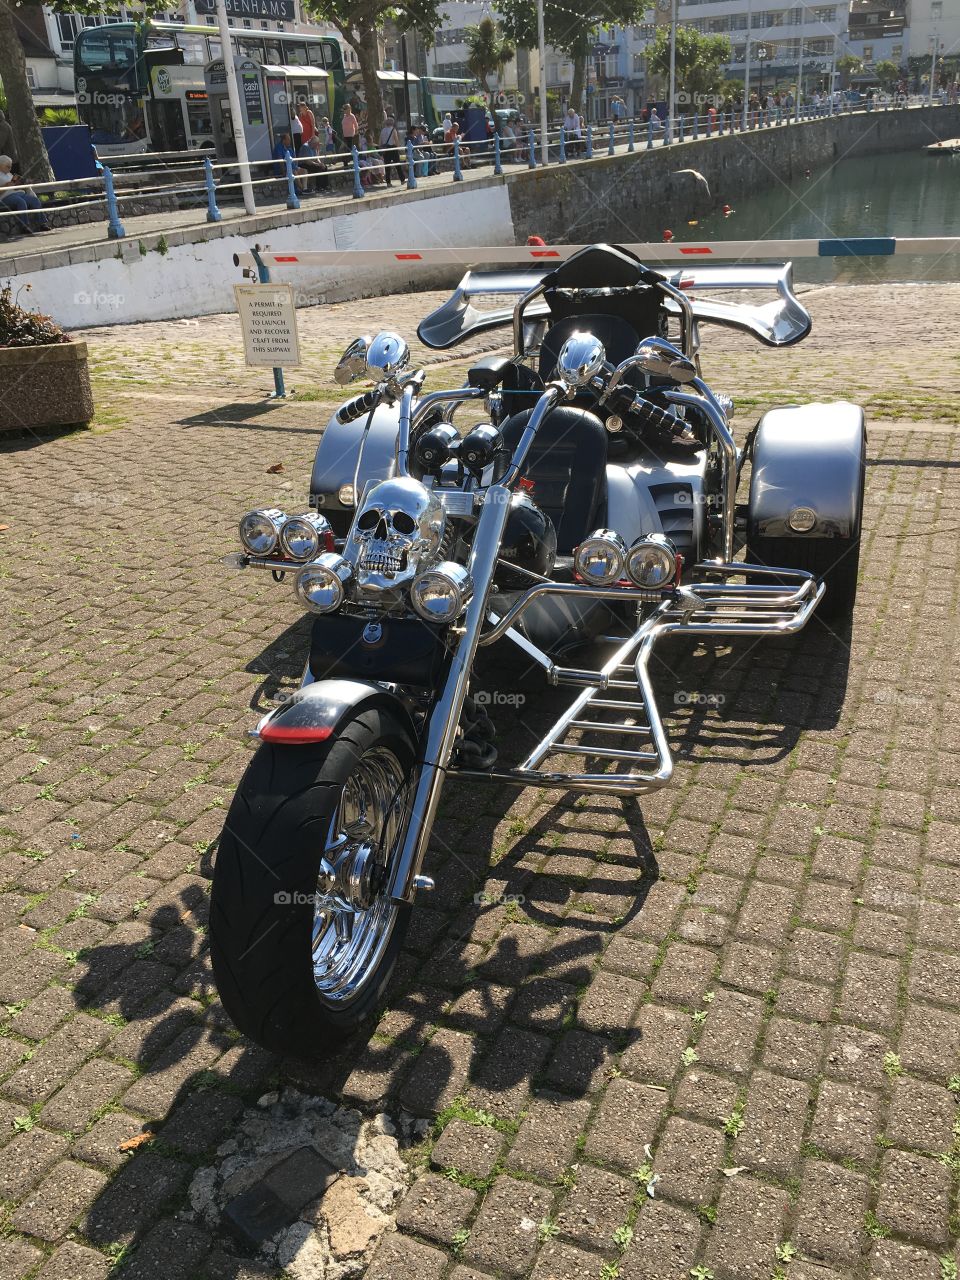 Awesome Ghost Rider inspired Trike